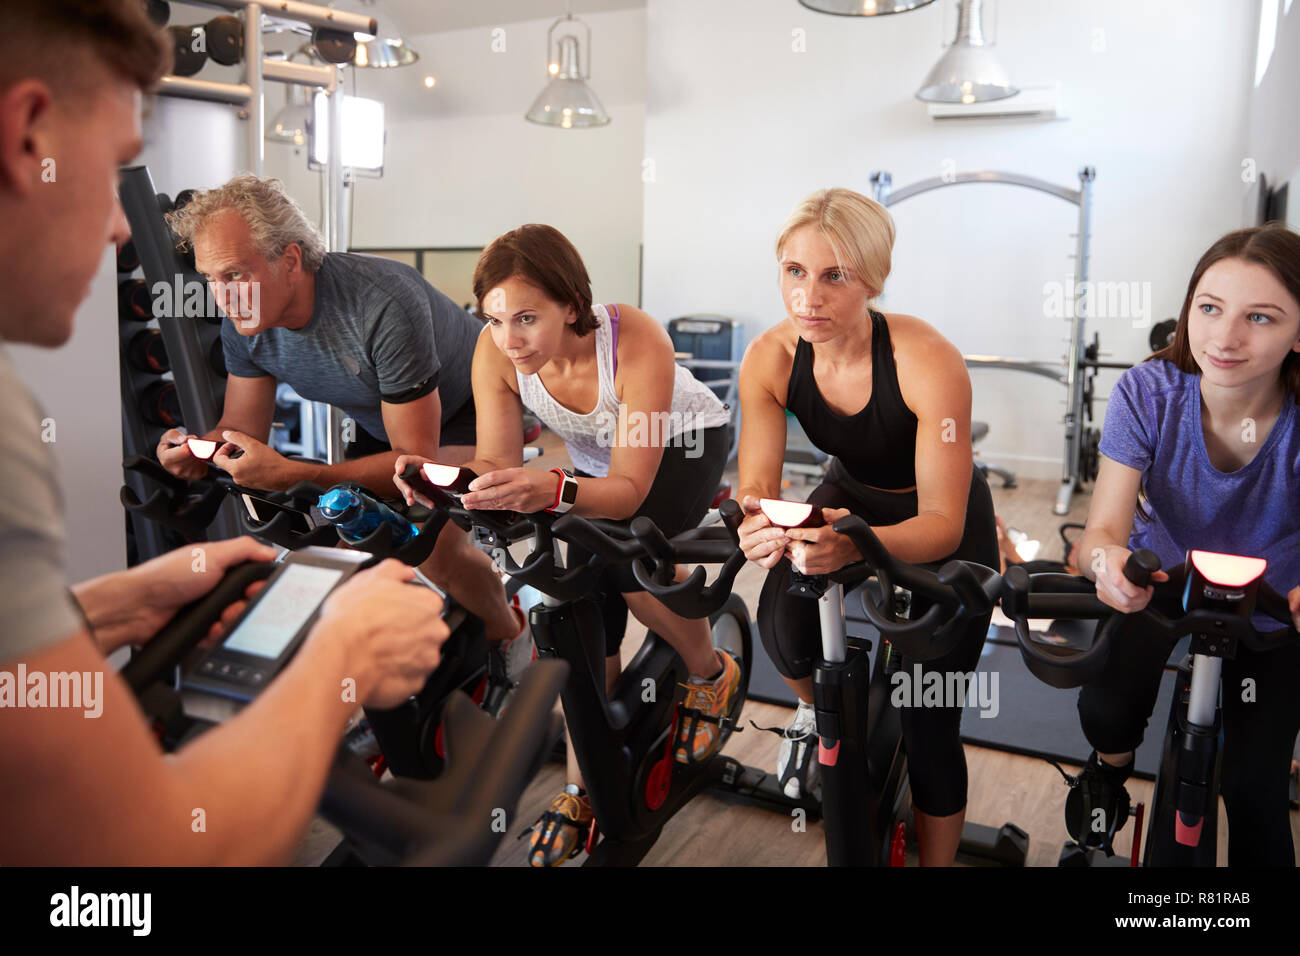 Male Trainer Taking Spin Class In Gym Stock Photo